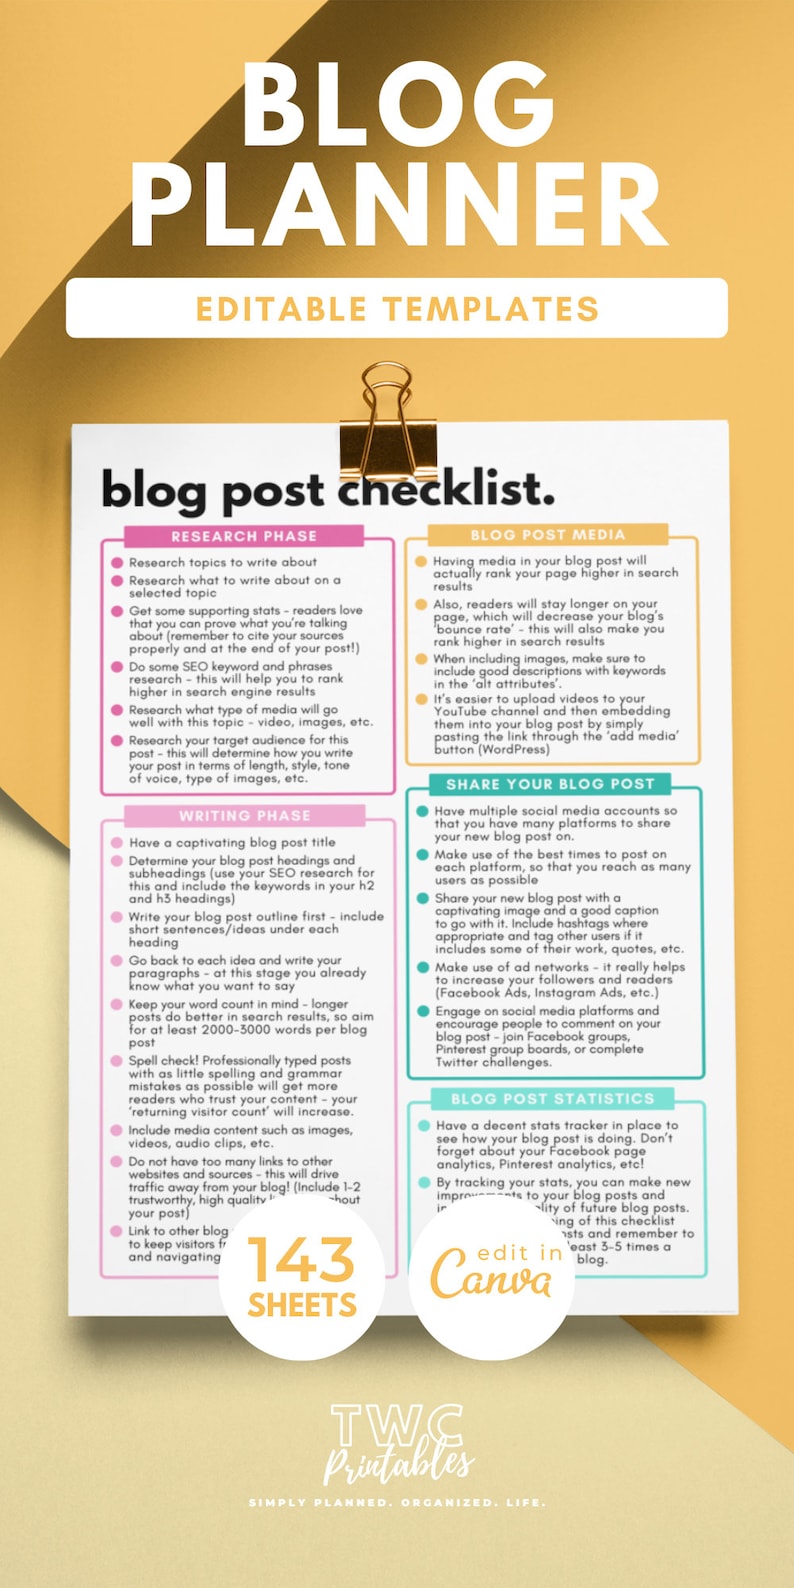 These Blog Planner Canva Templates will help you manage your blog like a pro! Use these Blogging Planner Templates to create a Blog Content Calendar. Learn Blogging How To by using this planner along with other blogging research.